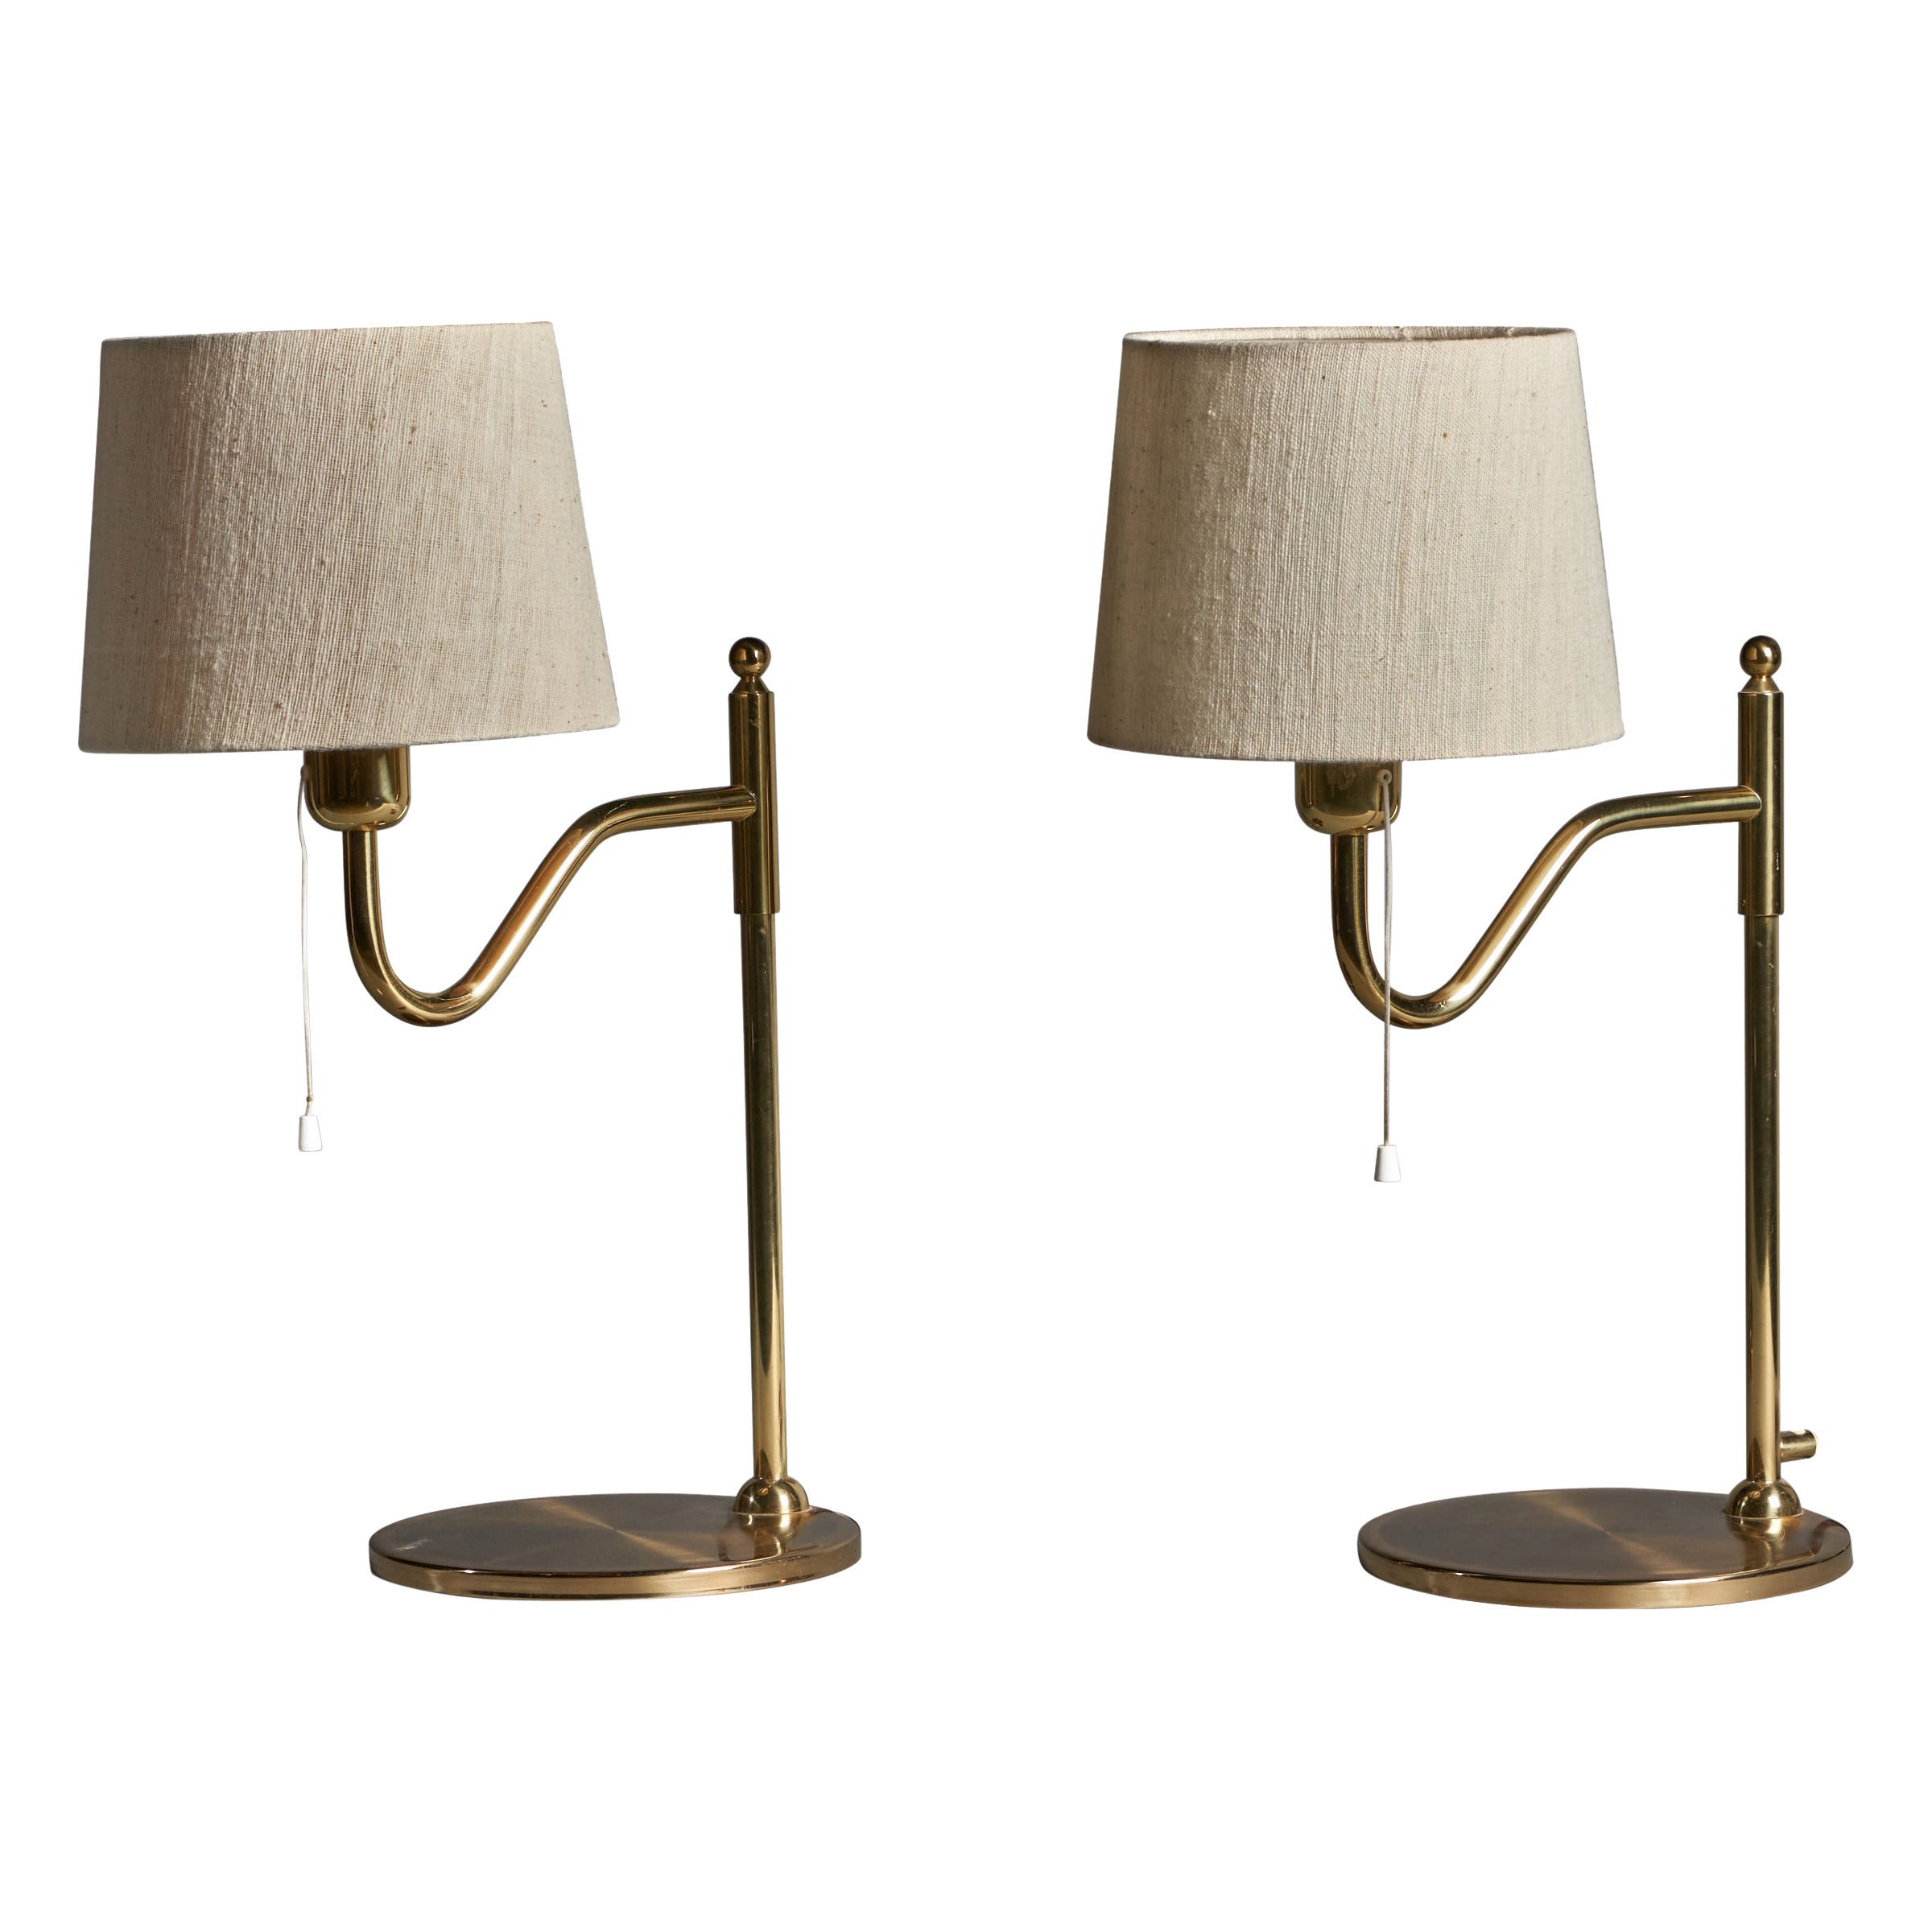 Nya Öia, Table Lamps, Brass, Fabric, Sweden, 1970s For Sale